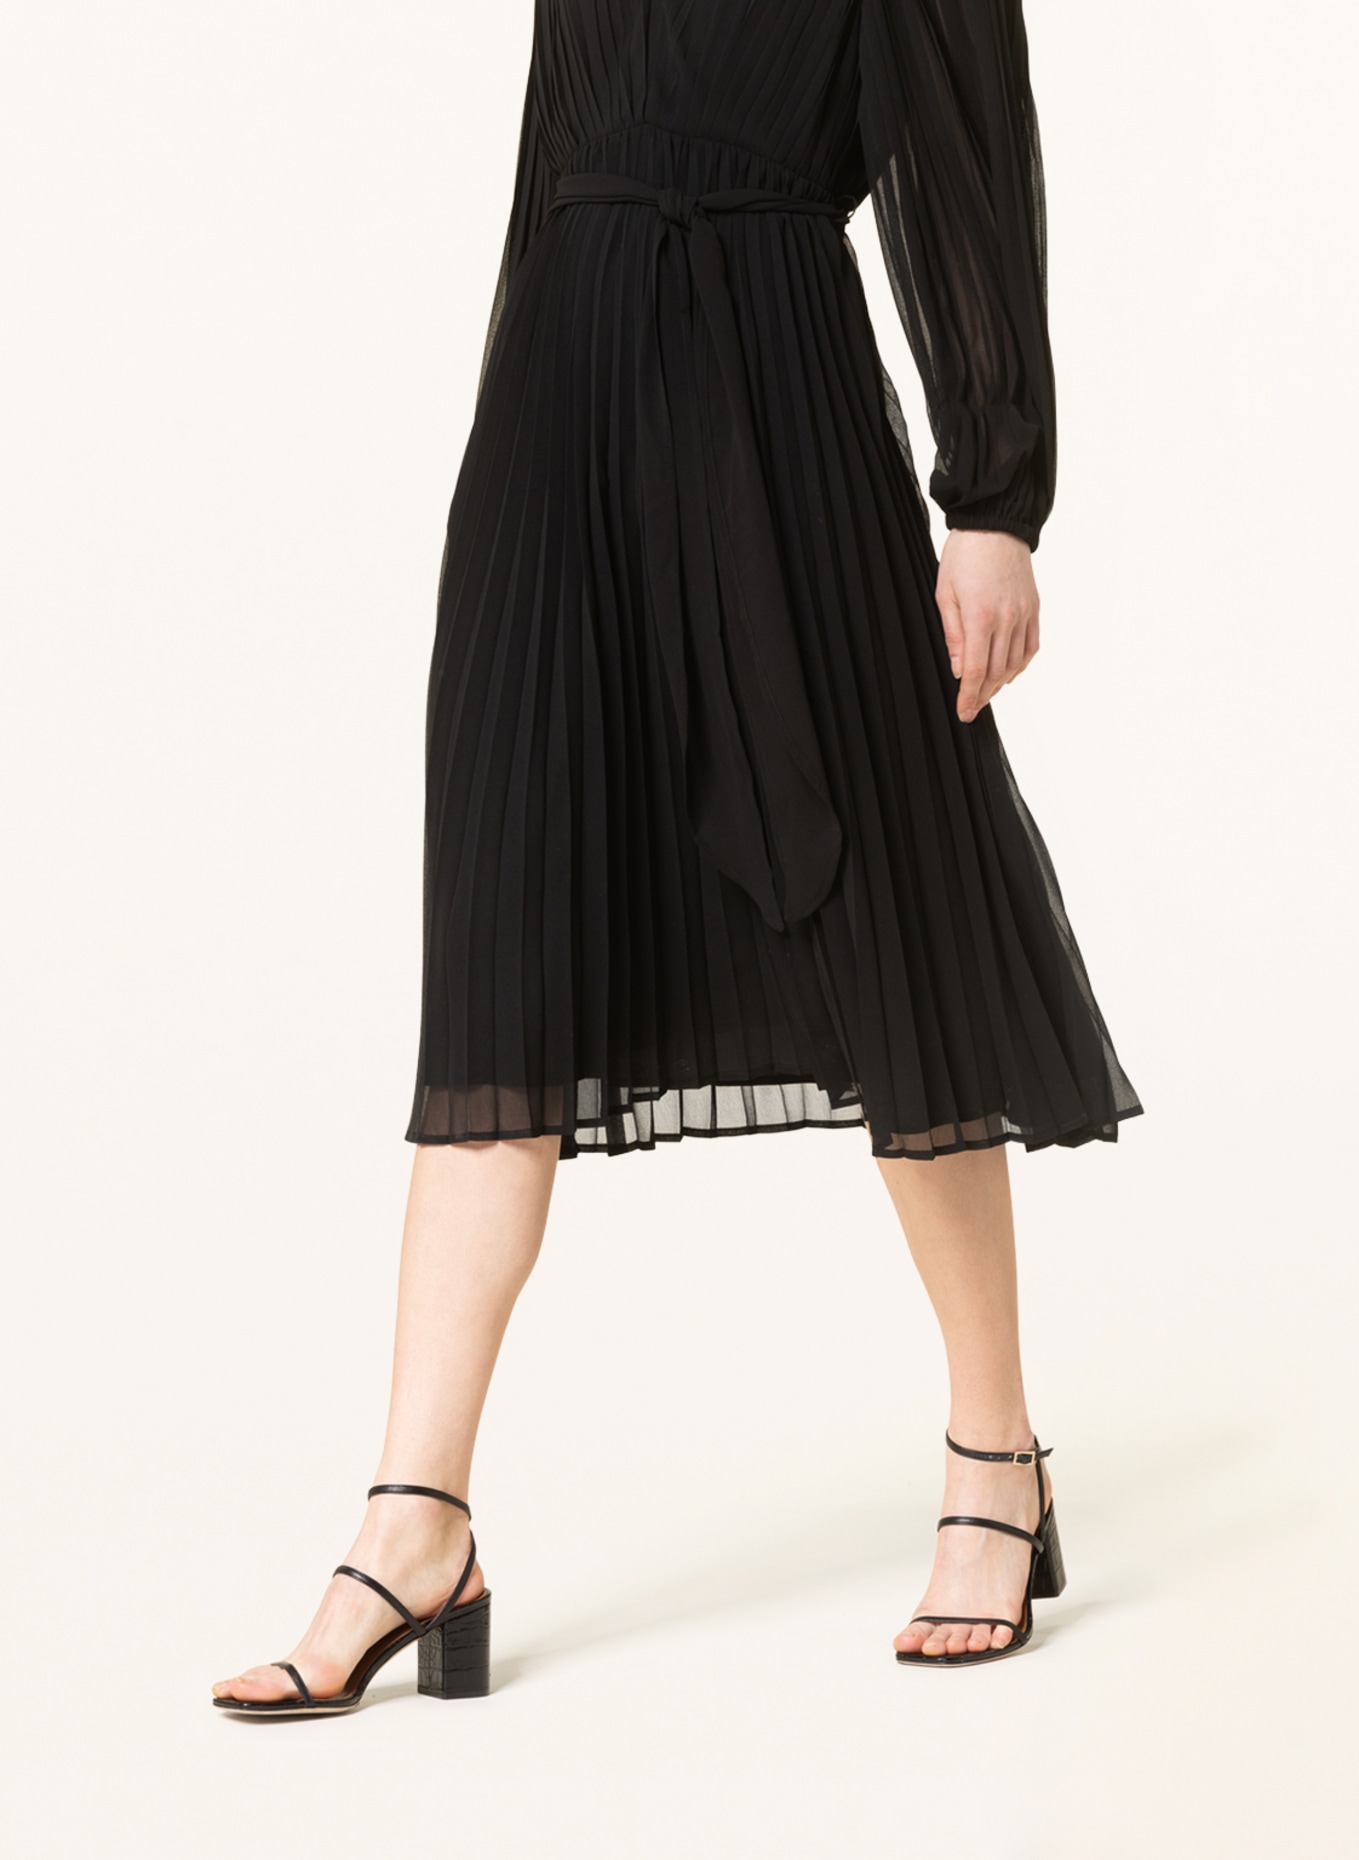 Princess GOES HOLLYWOOD Dress with pleats, Color: BLACK (Image 4)